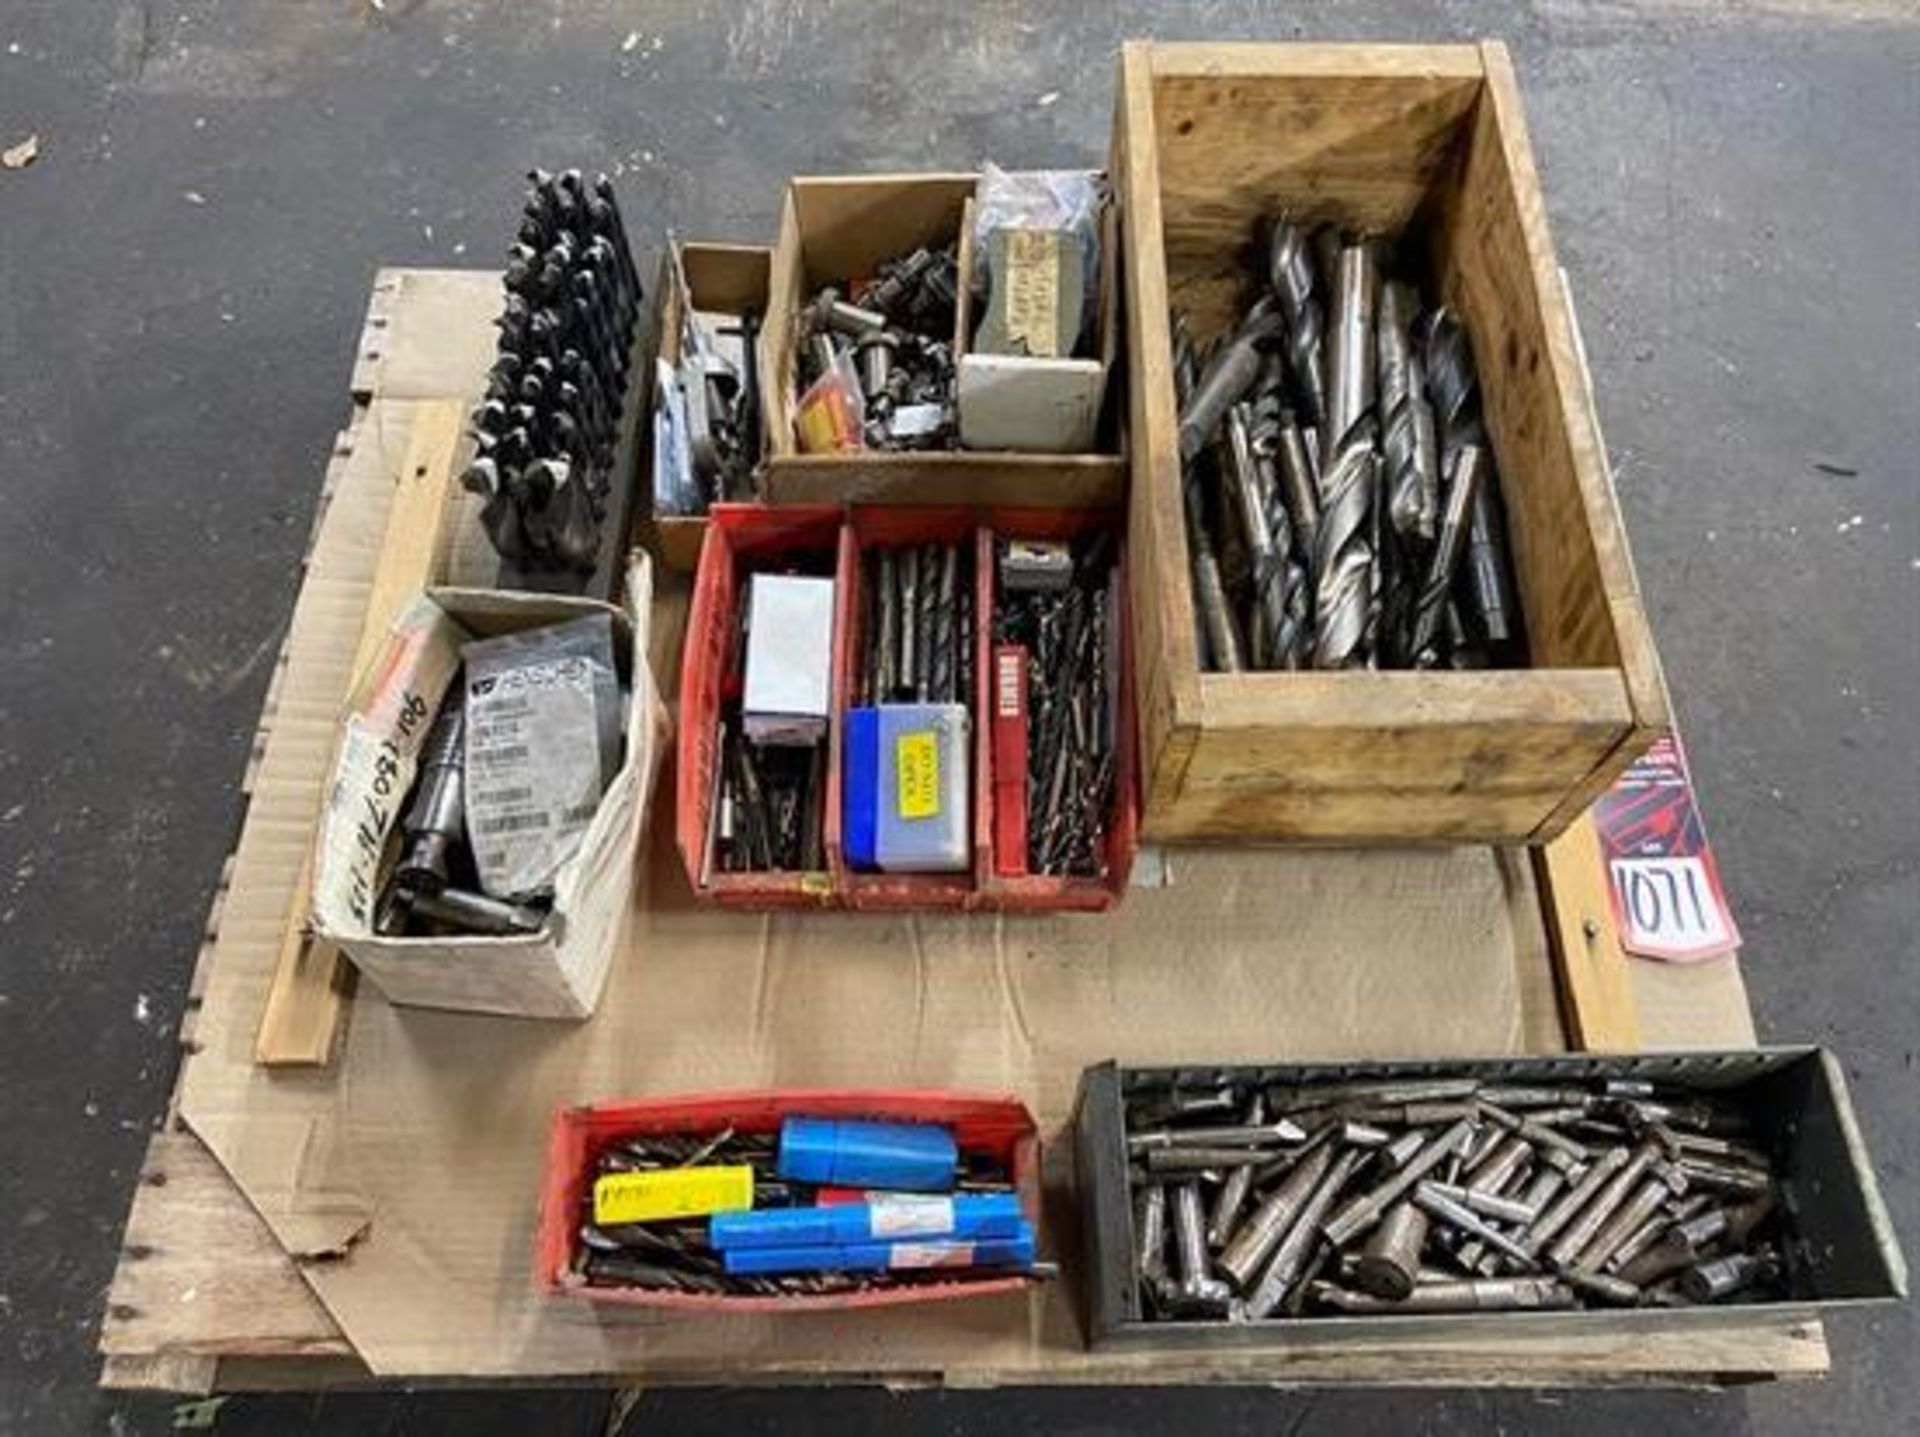 Lot Comprising of Twist Drills, Boring Bars, Taps, Broach Tooling, Hones and Drill Bushings